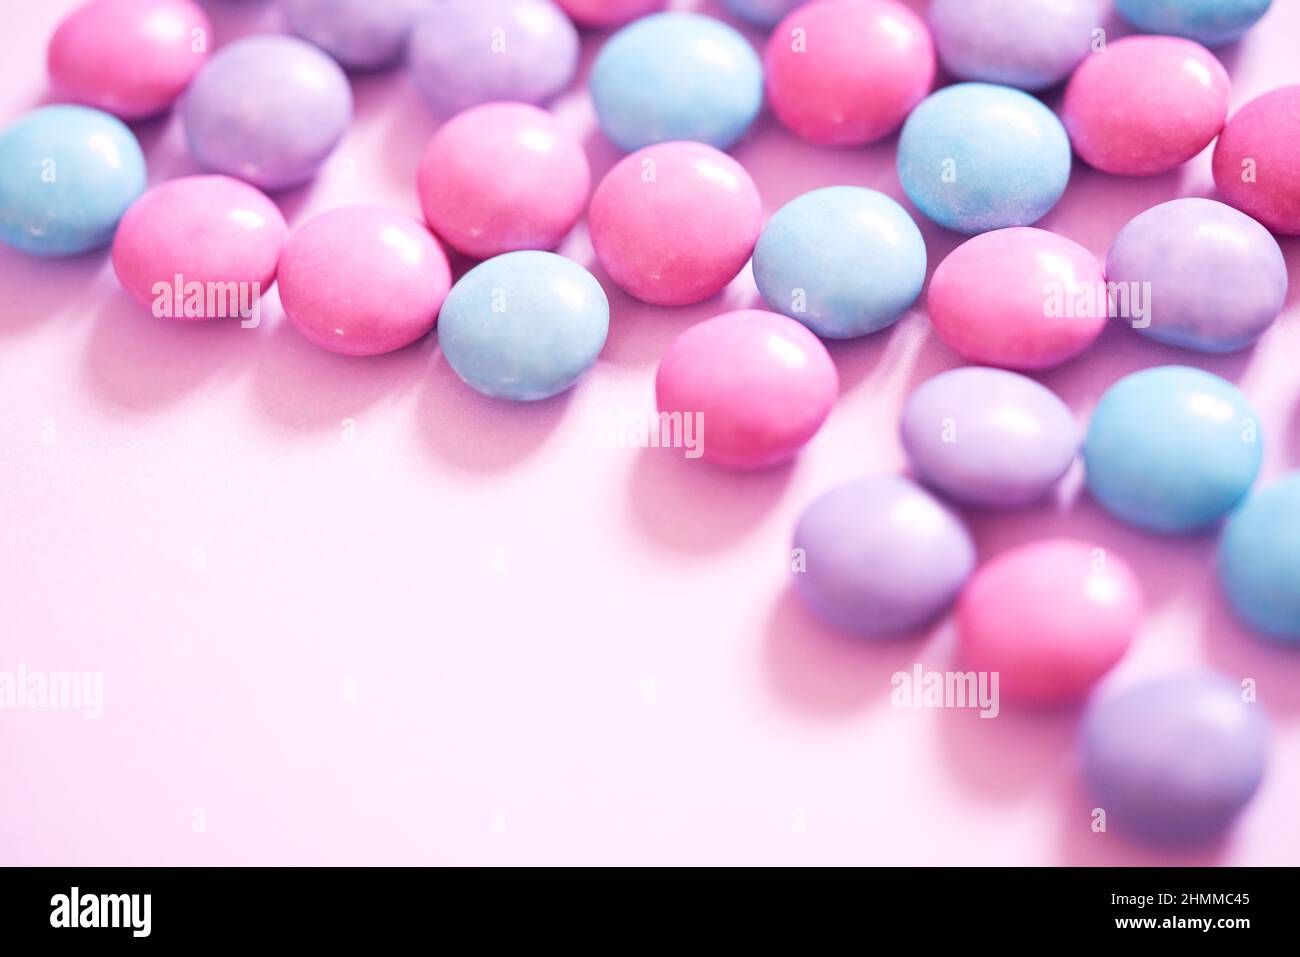 Pastel pink, blue and lavender purple smarties choc candy on a plain, light  pink background. Closeup, feminine banner image for web and social media  Stock Photo - Alamy